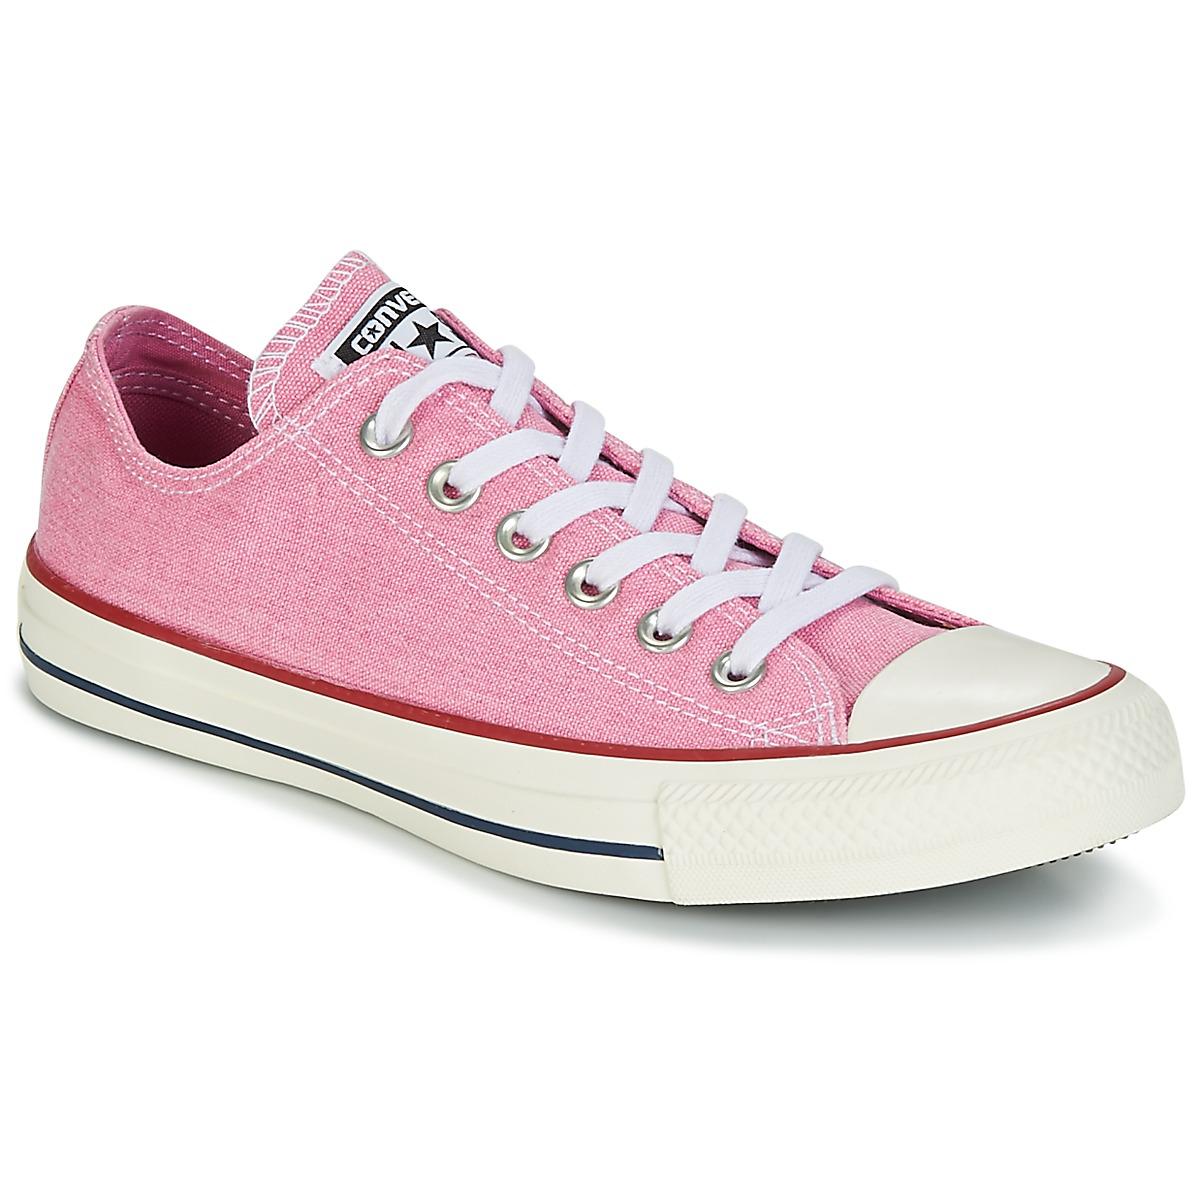 converse chuck taylor all star ox trainers in stonewashed pink